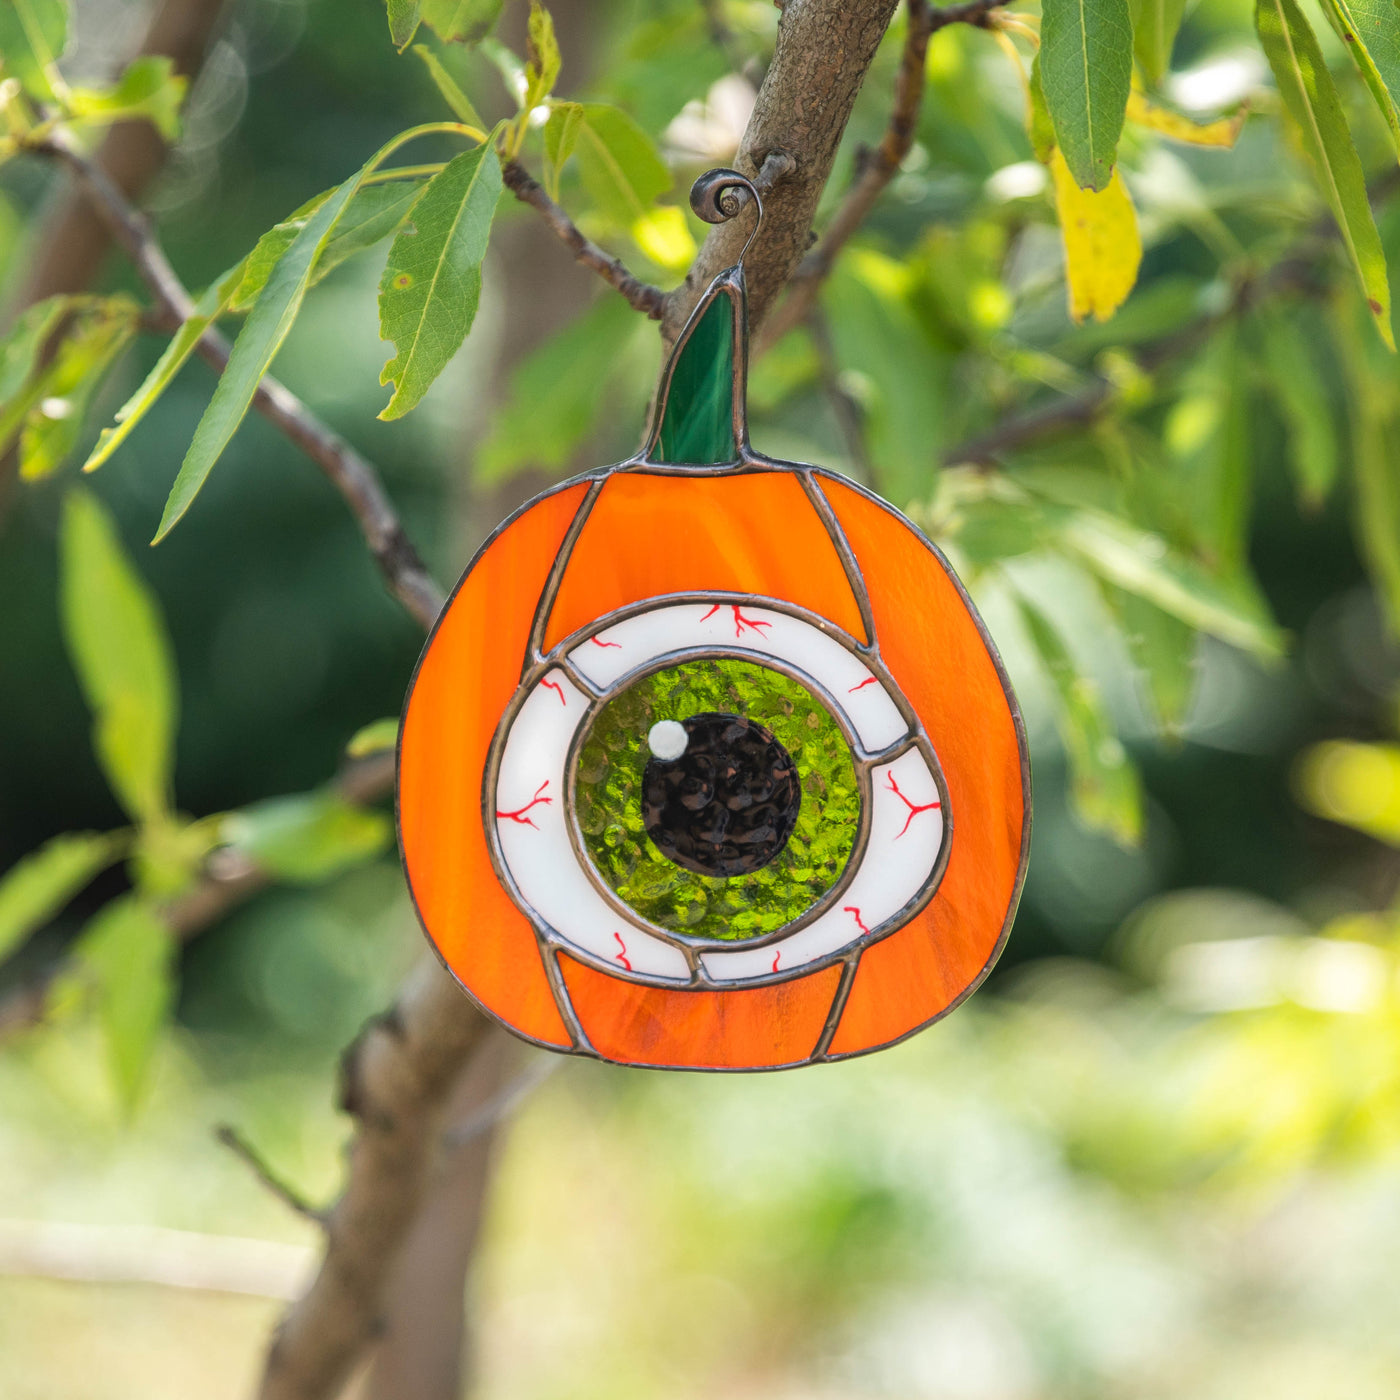 Stained glass pumpkin with the green eye inside suncatcher